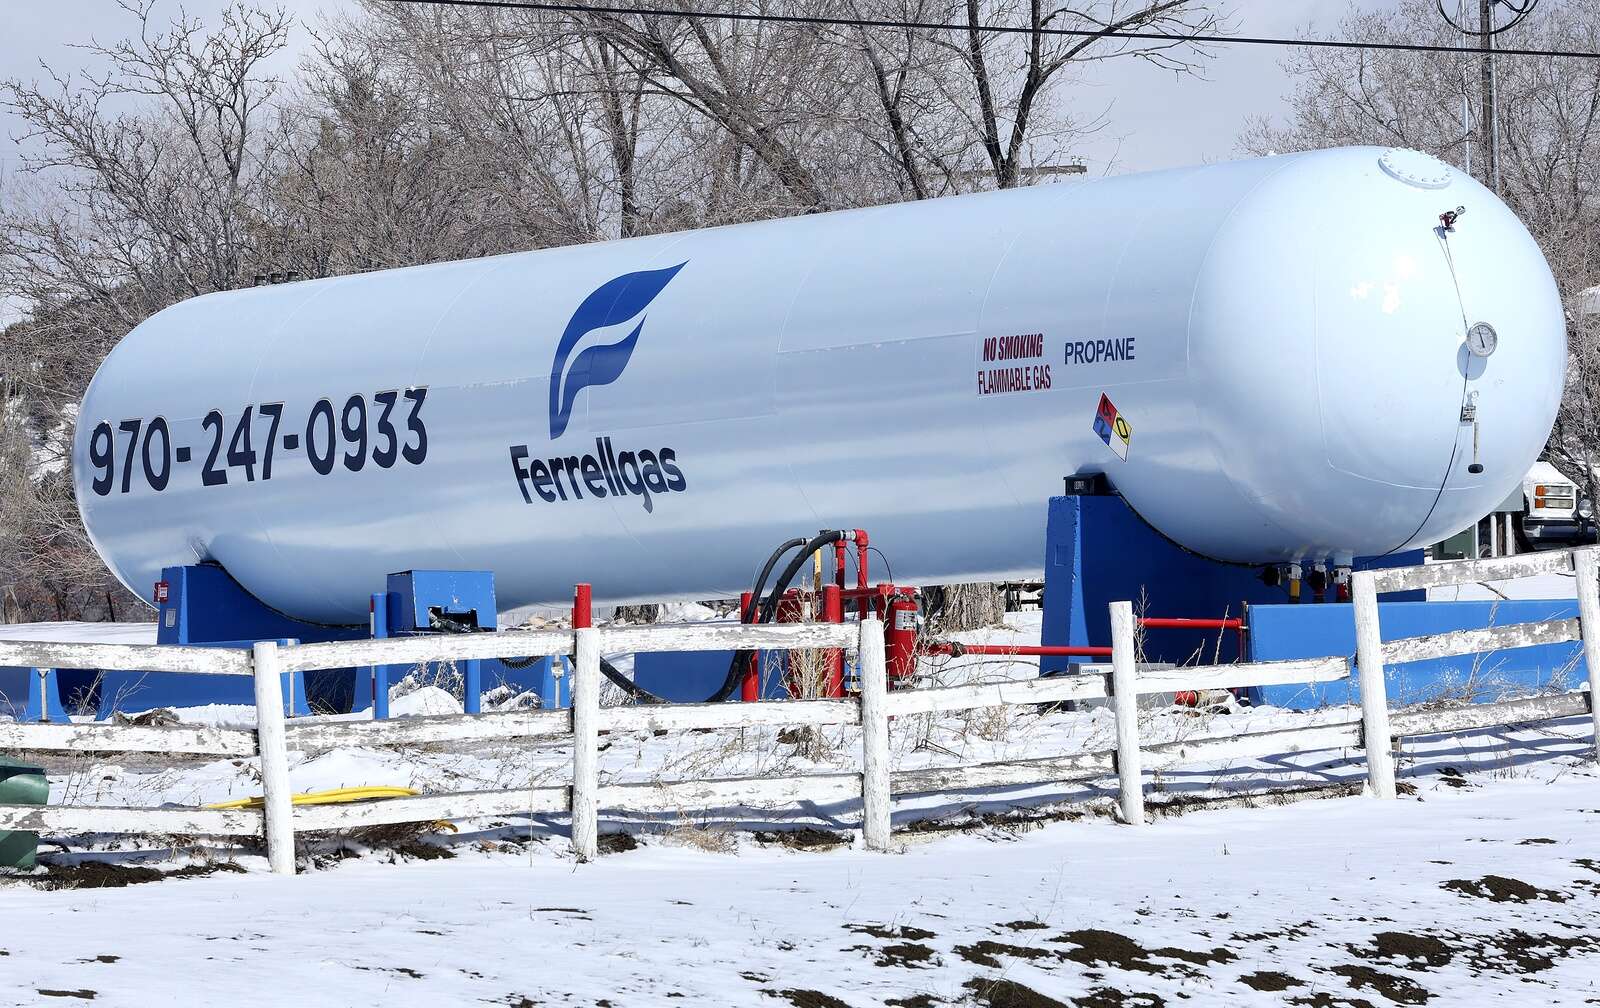 How old can a propane tank be?, Ferrellgas